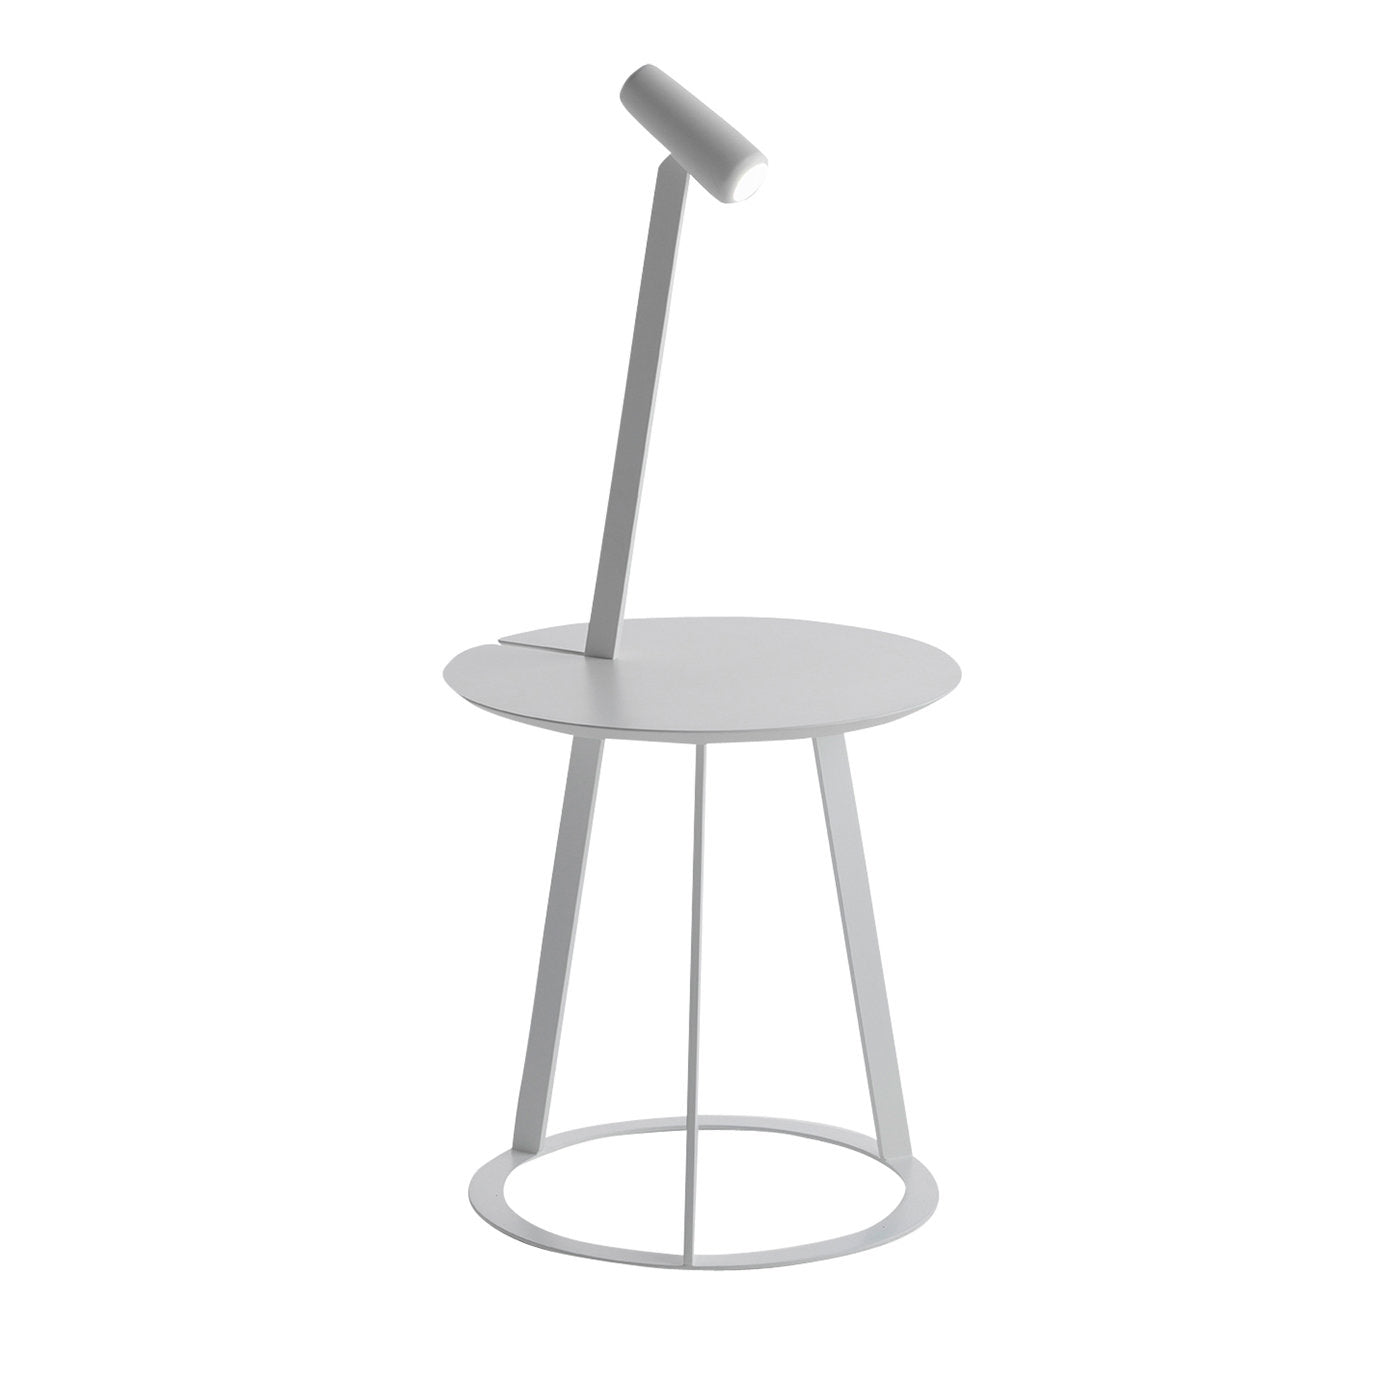 Albino Torcia White Side Table by Salvatore Indriolo - Main view